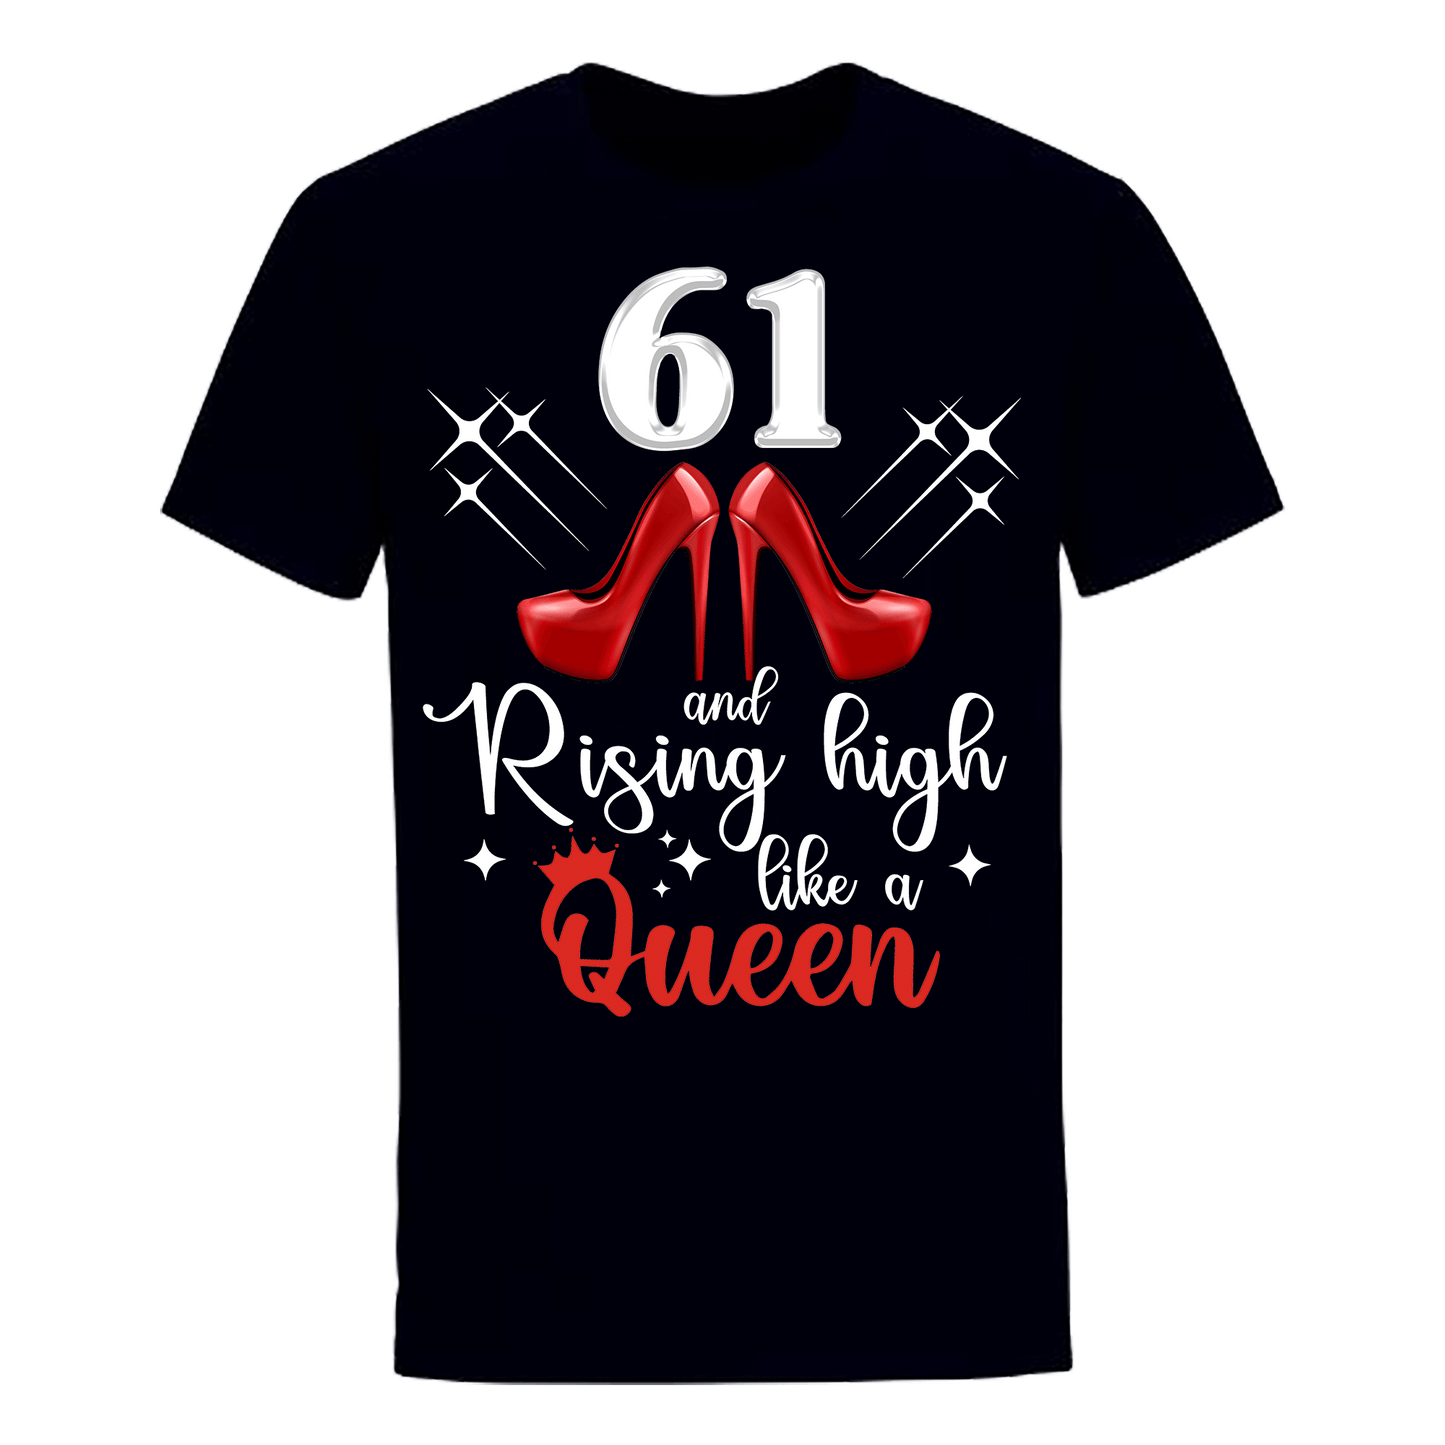 61 AND RISING HIGH LIKE A QUEEN UNISEX SHIRT